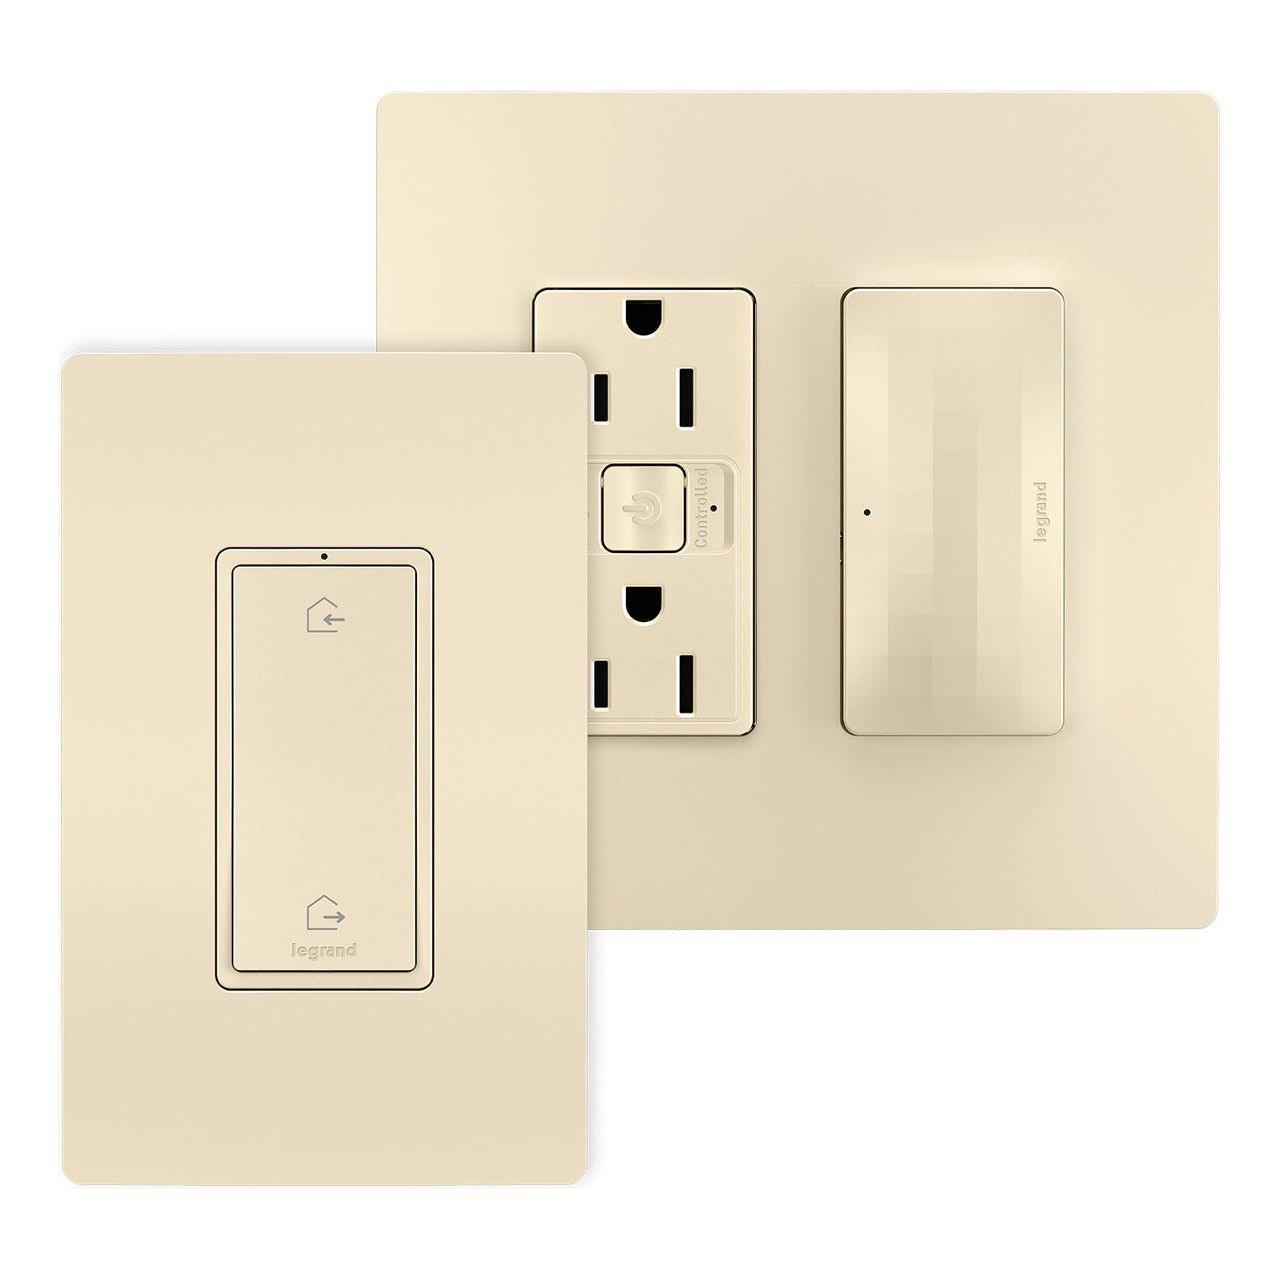 Legrand - radiant with Netatmo Outlet Kit with Home/Away Switch - Lights Canada